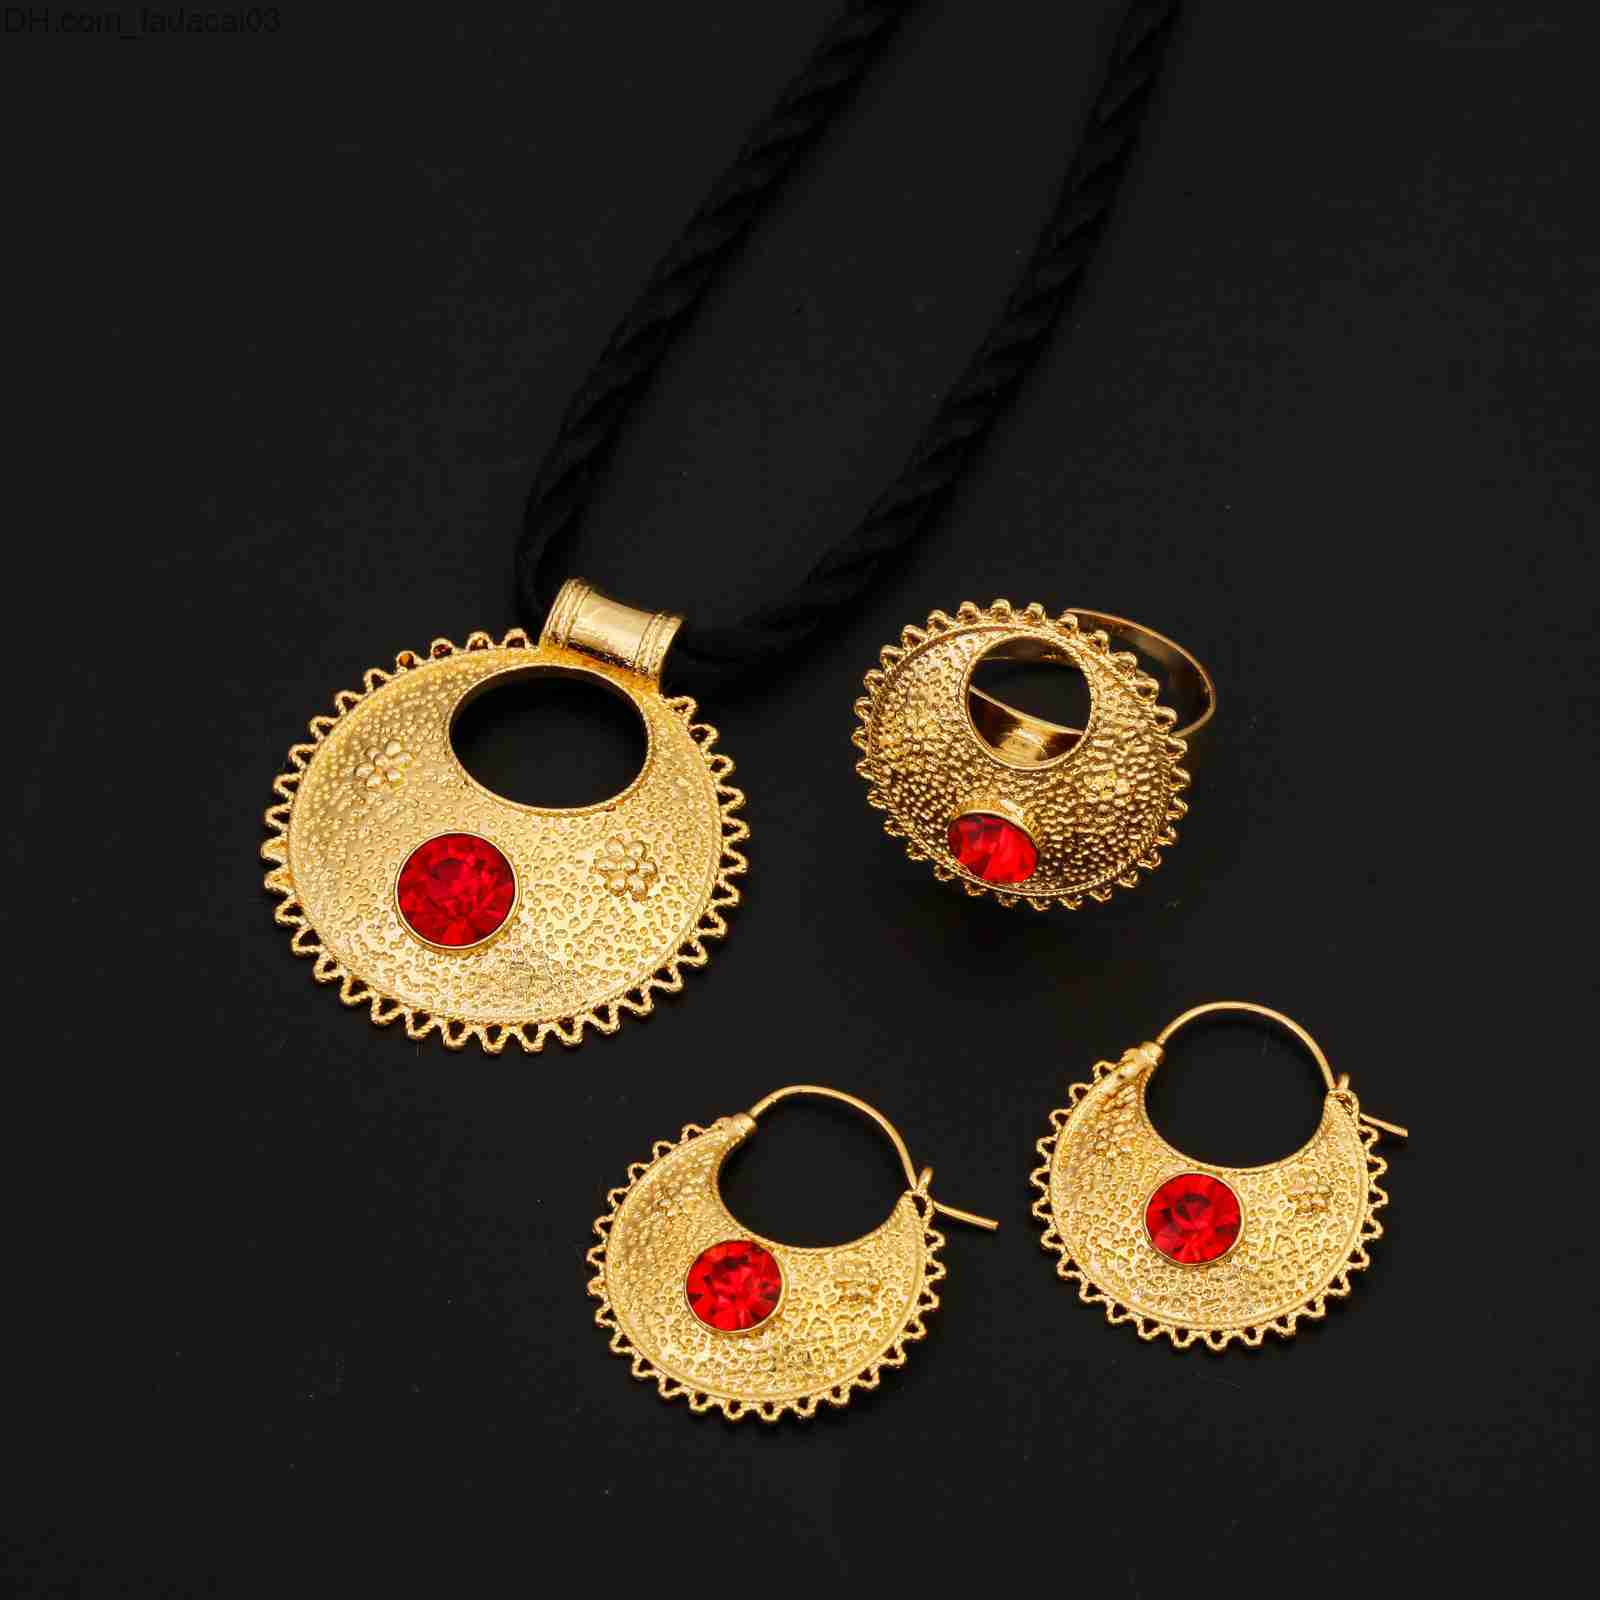 Earrings Necklace Earrings Necklace Blue Red Green Stone Ethiopian Pendant Necklaces Earrings Ring Gold Color Africa Bride Wedding Jewelry Set 230506 Z230630